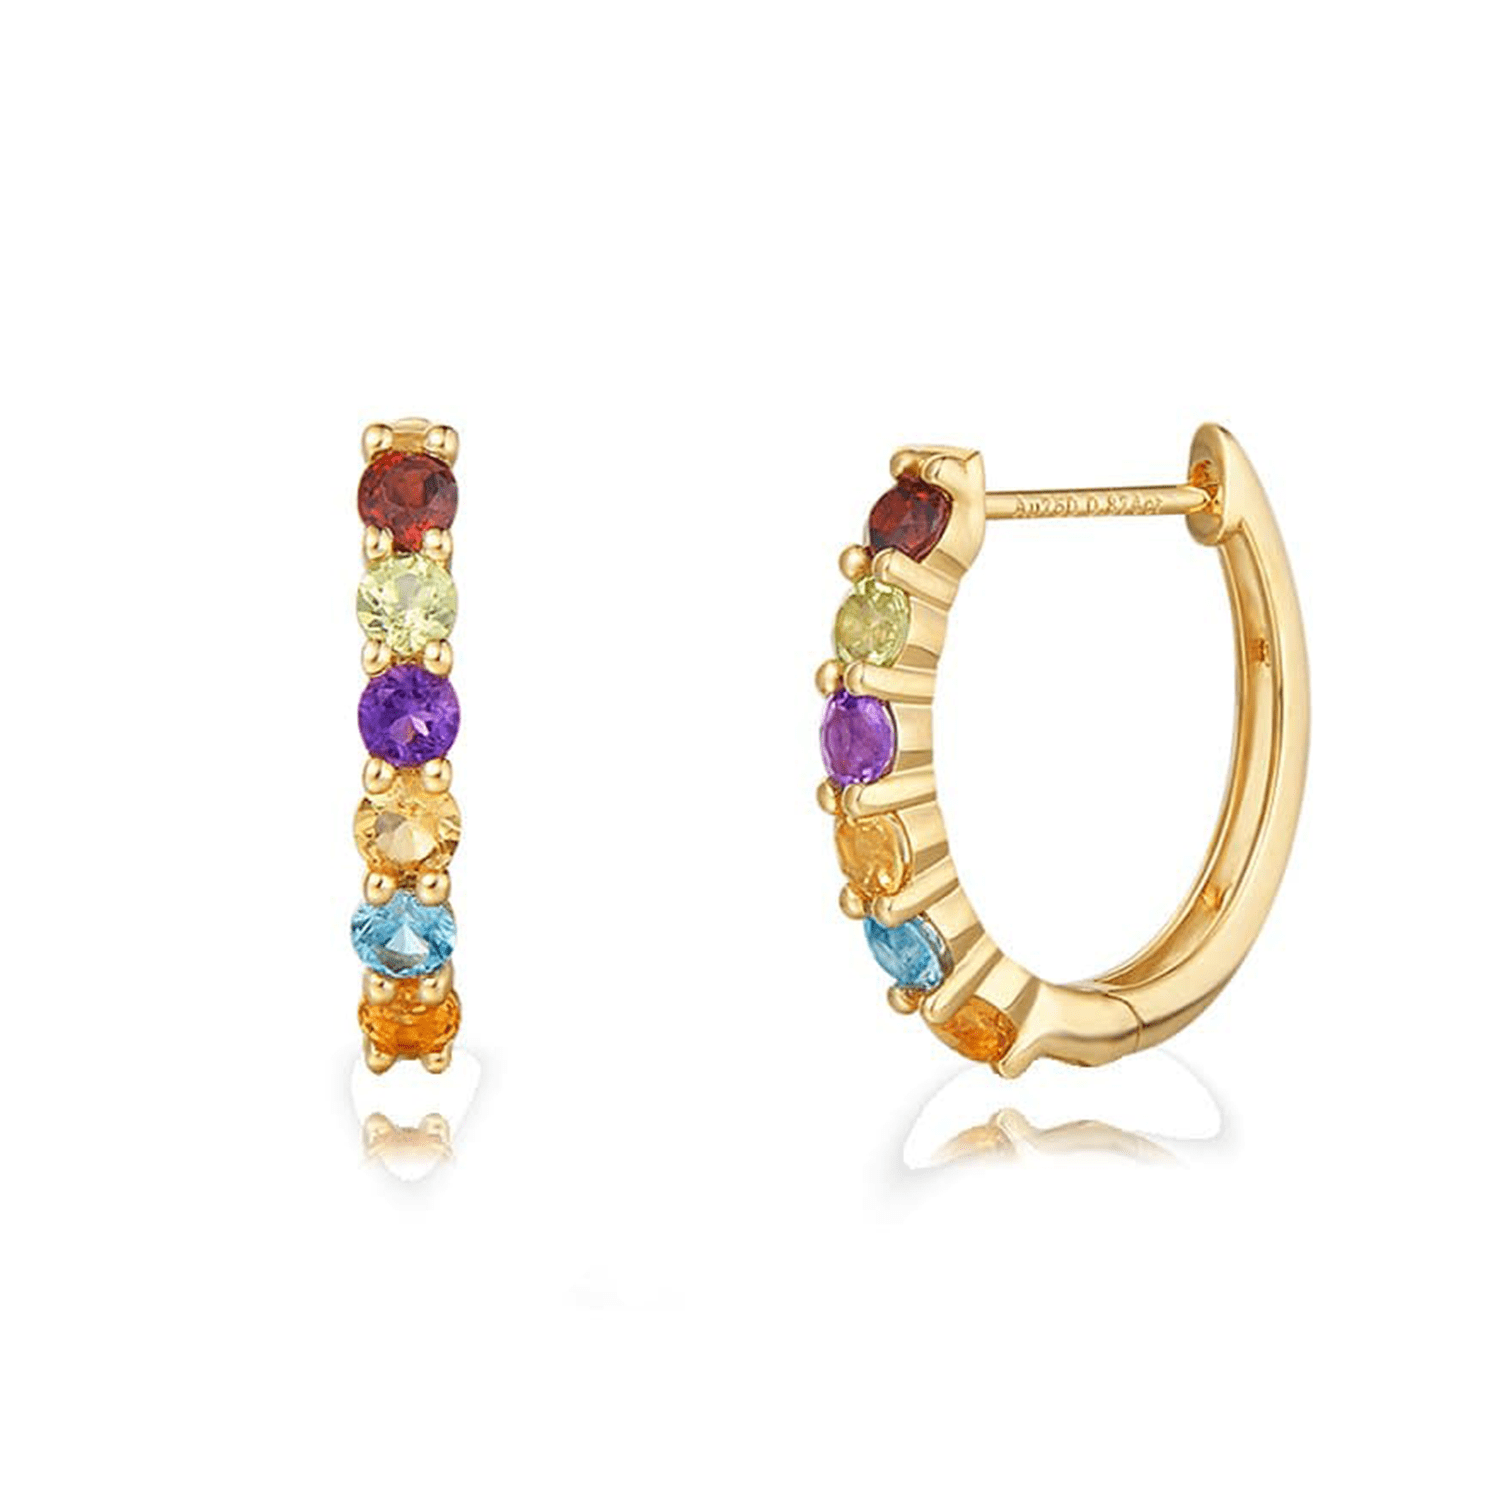 FANCIME "Colorful Moon" Gemstone 14k yellow gold Hoops Main